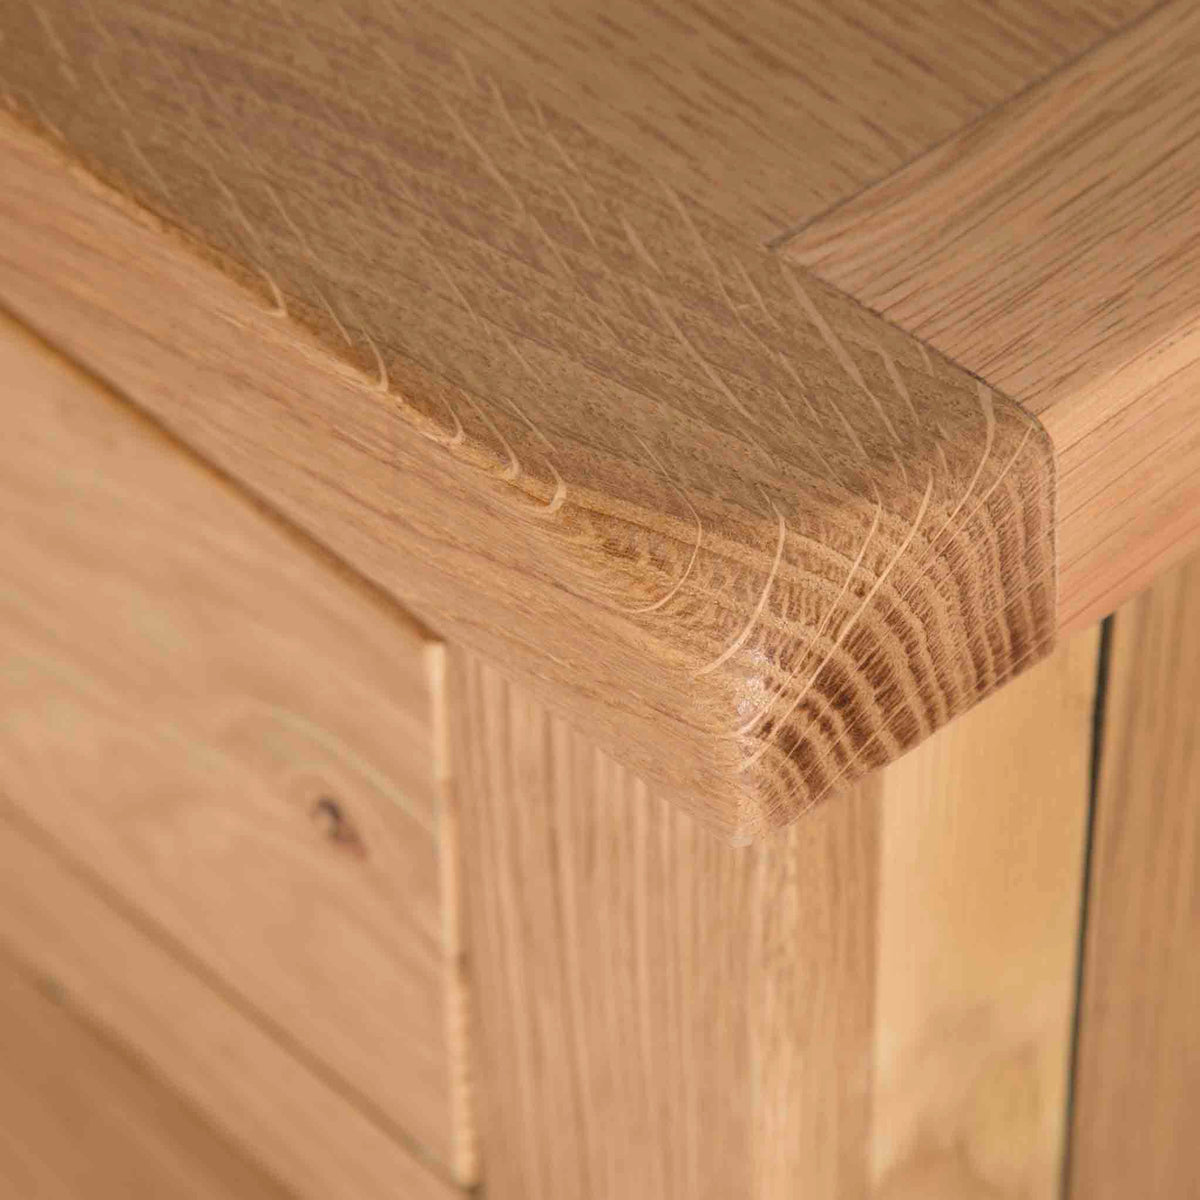  Surrey Oak 2 Over 4 Chest of Drawers - Close up of corner